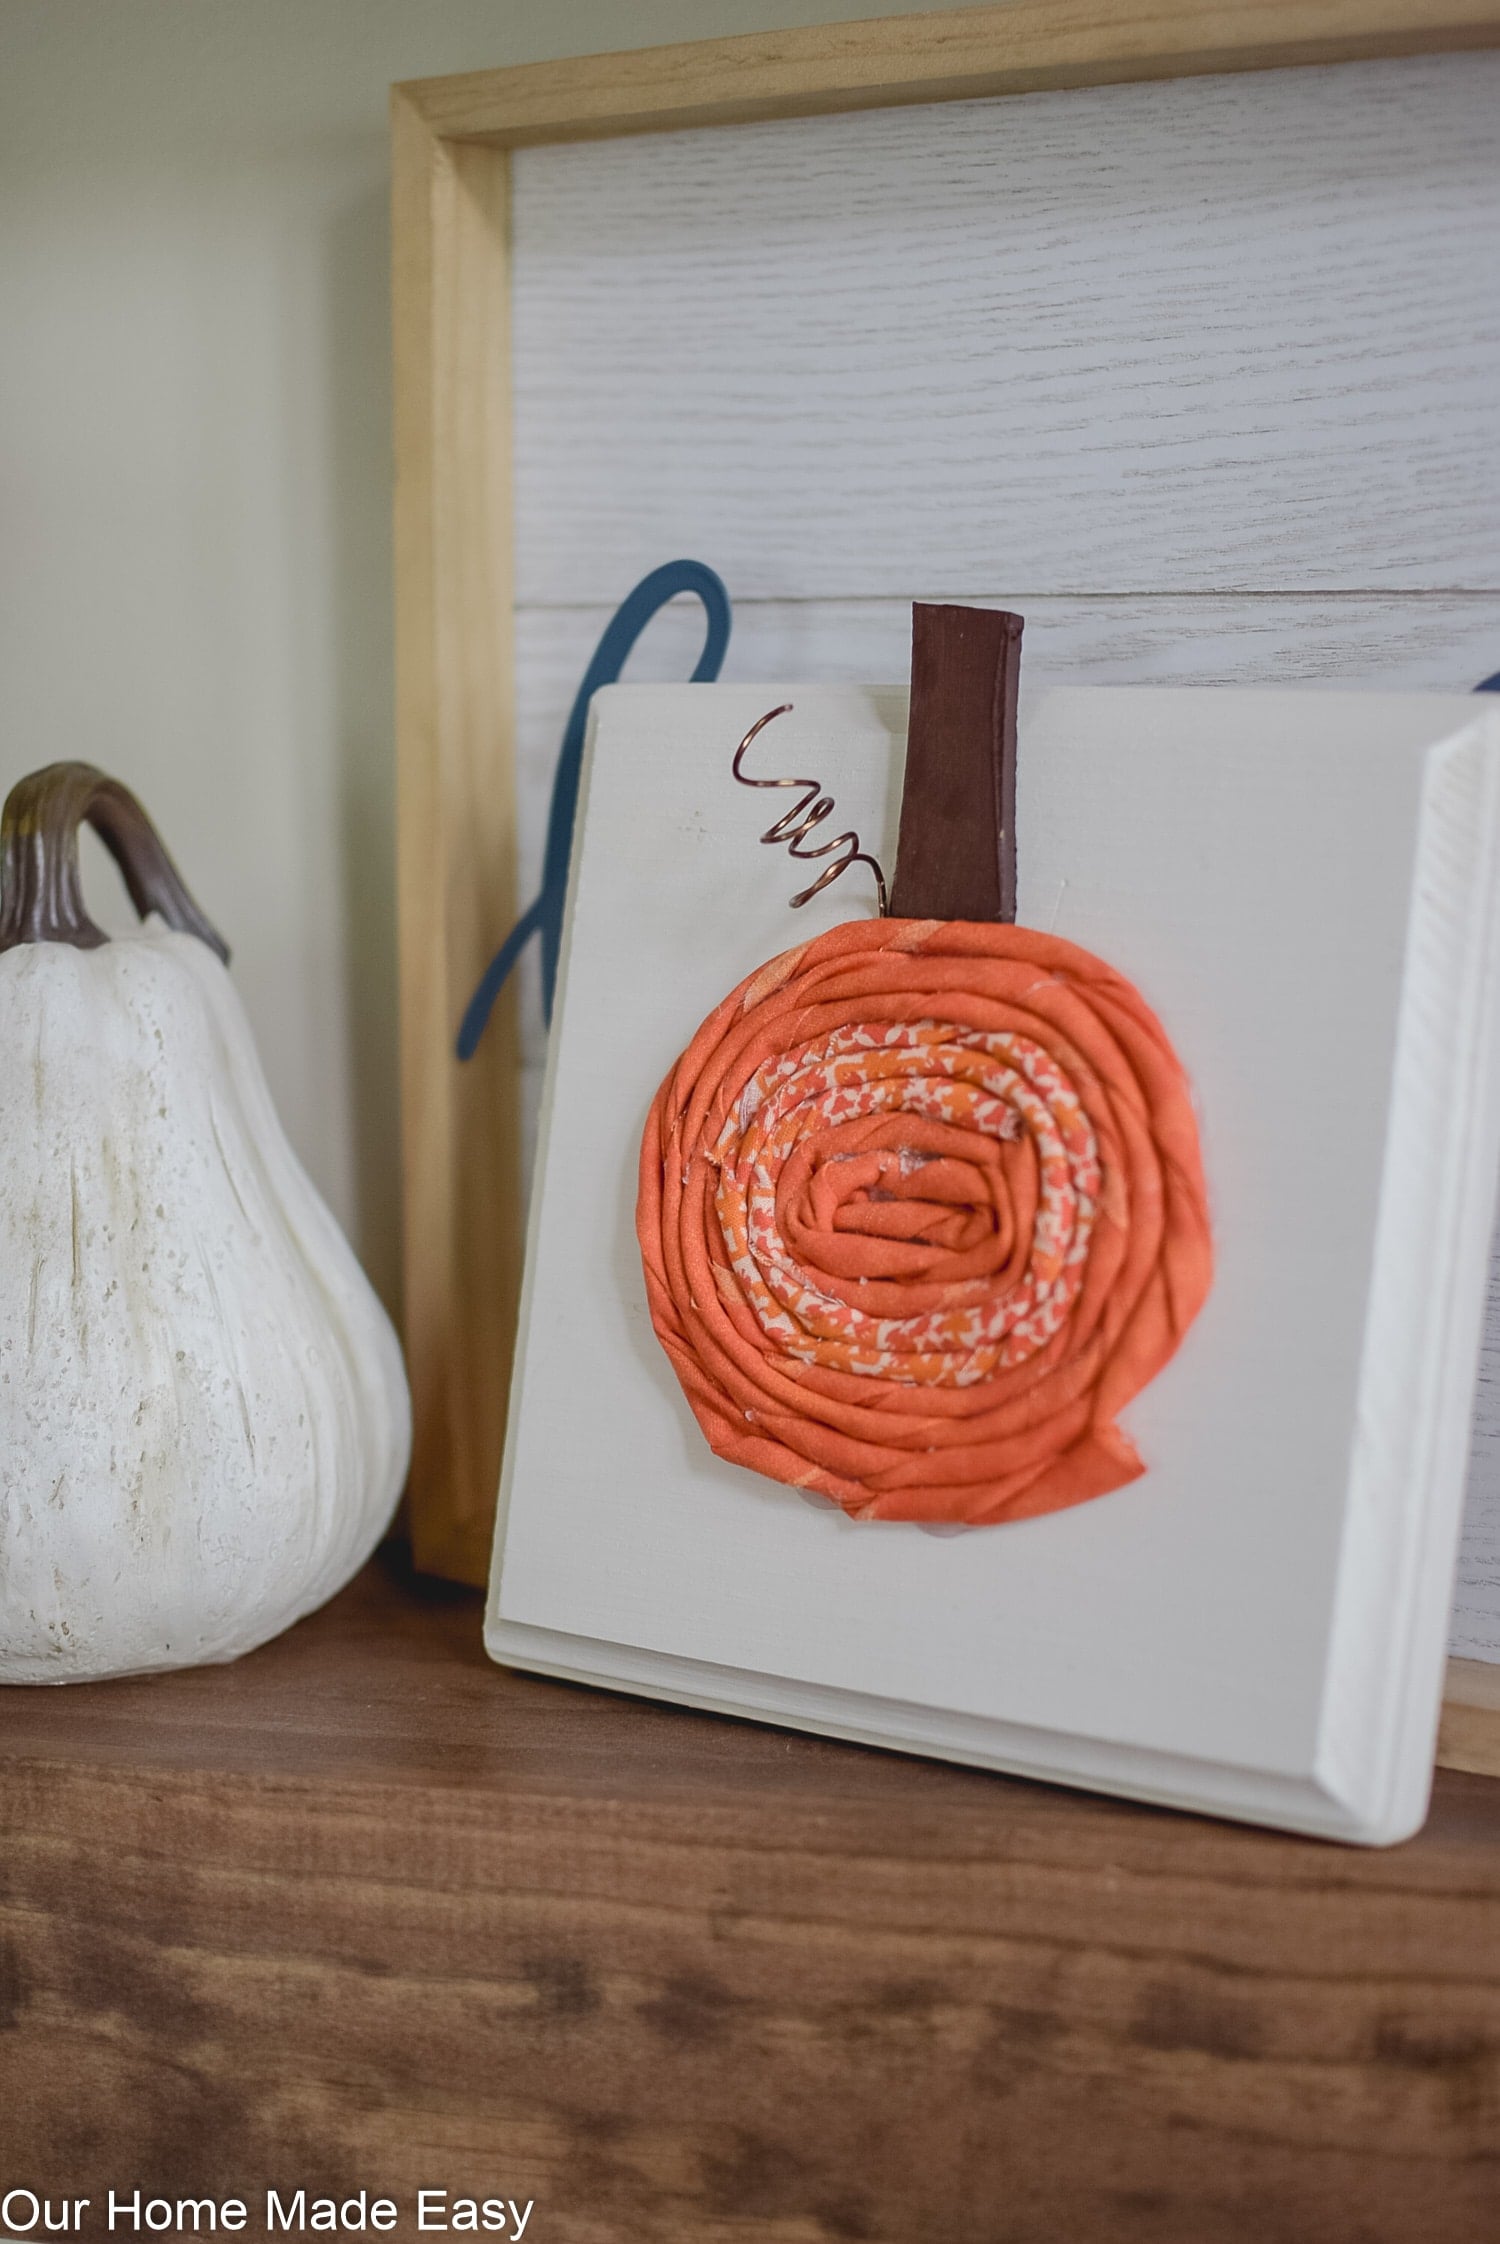 This easy tutorial on how to make fabric pumpkins will add some rustic DIY fall decor to your home